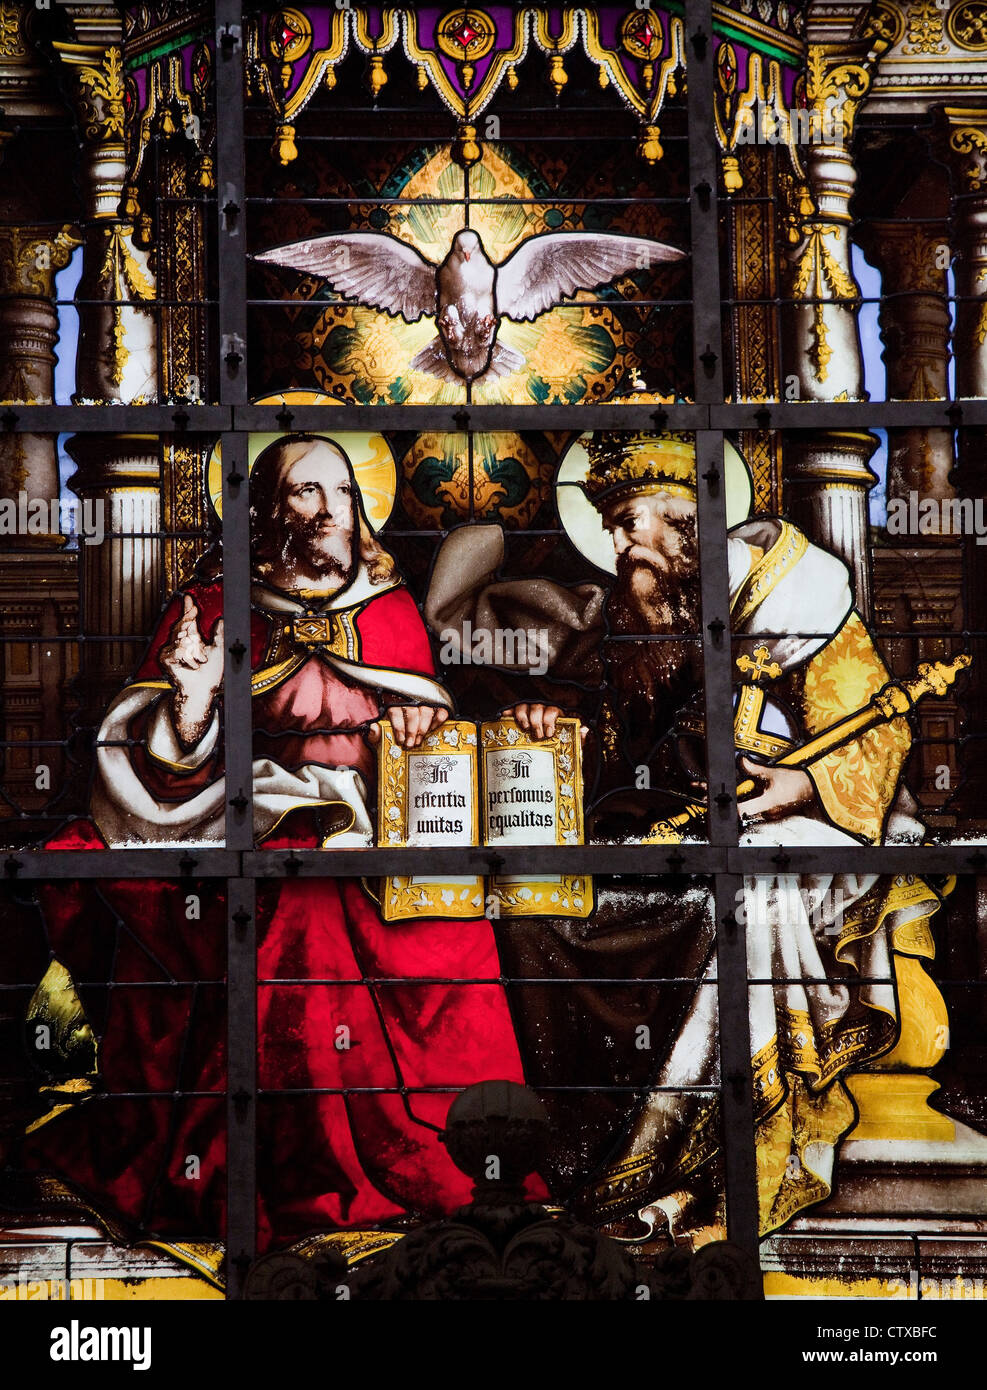 Trinity glass window, depicting Father, Son and Holy Spirit. Stock Photo